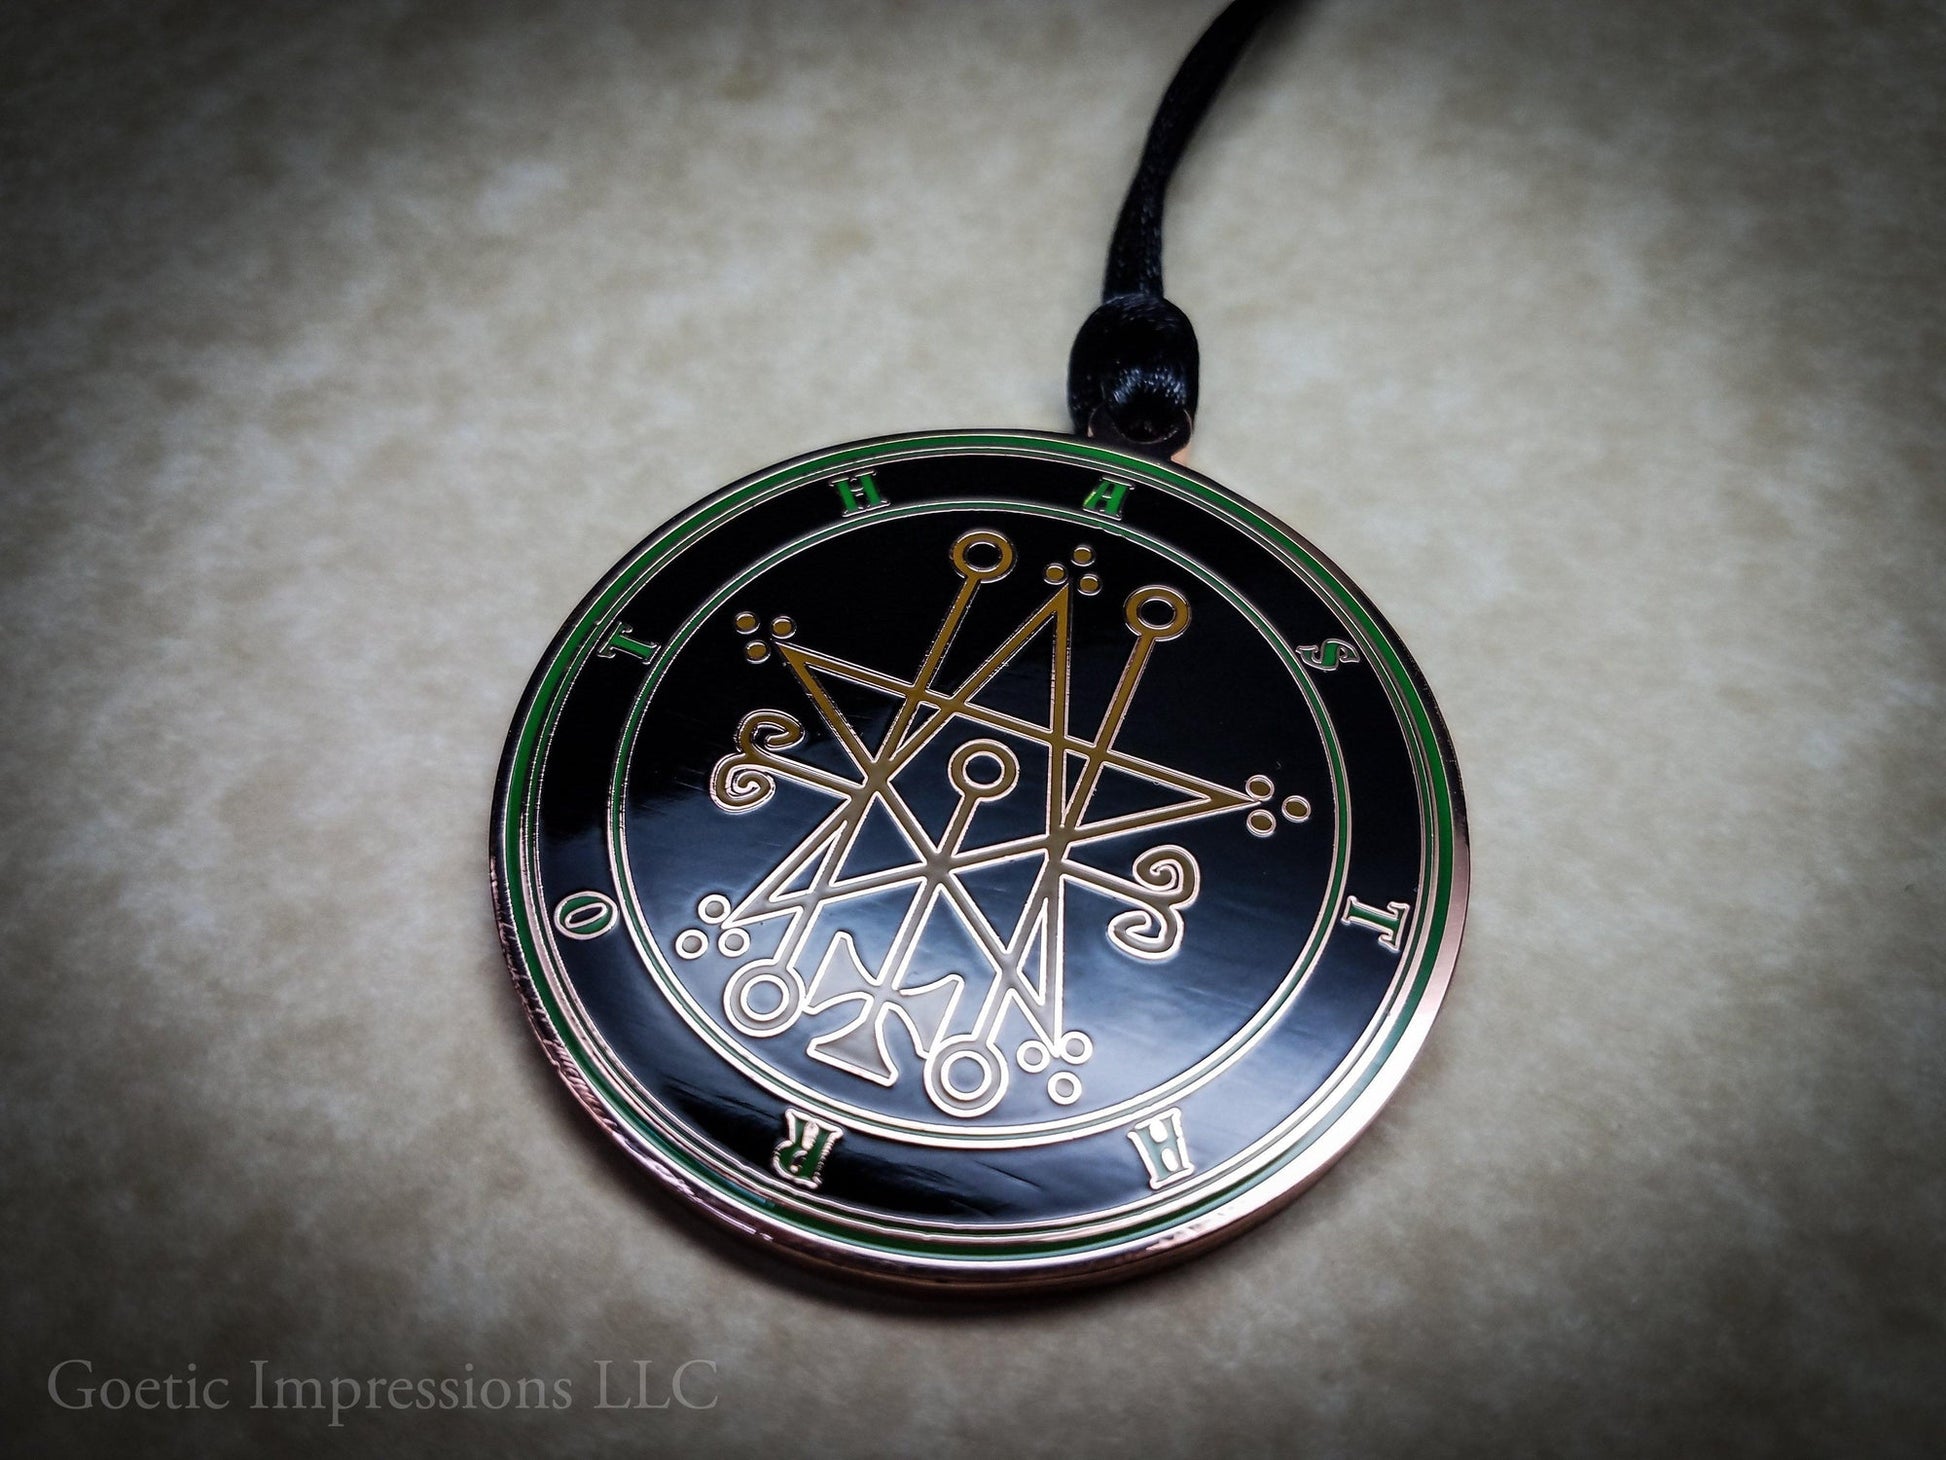 Seal of Astaroth sigil talisman with Pentacle of Solomon on reverse side.